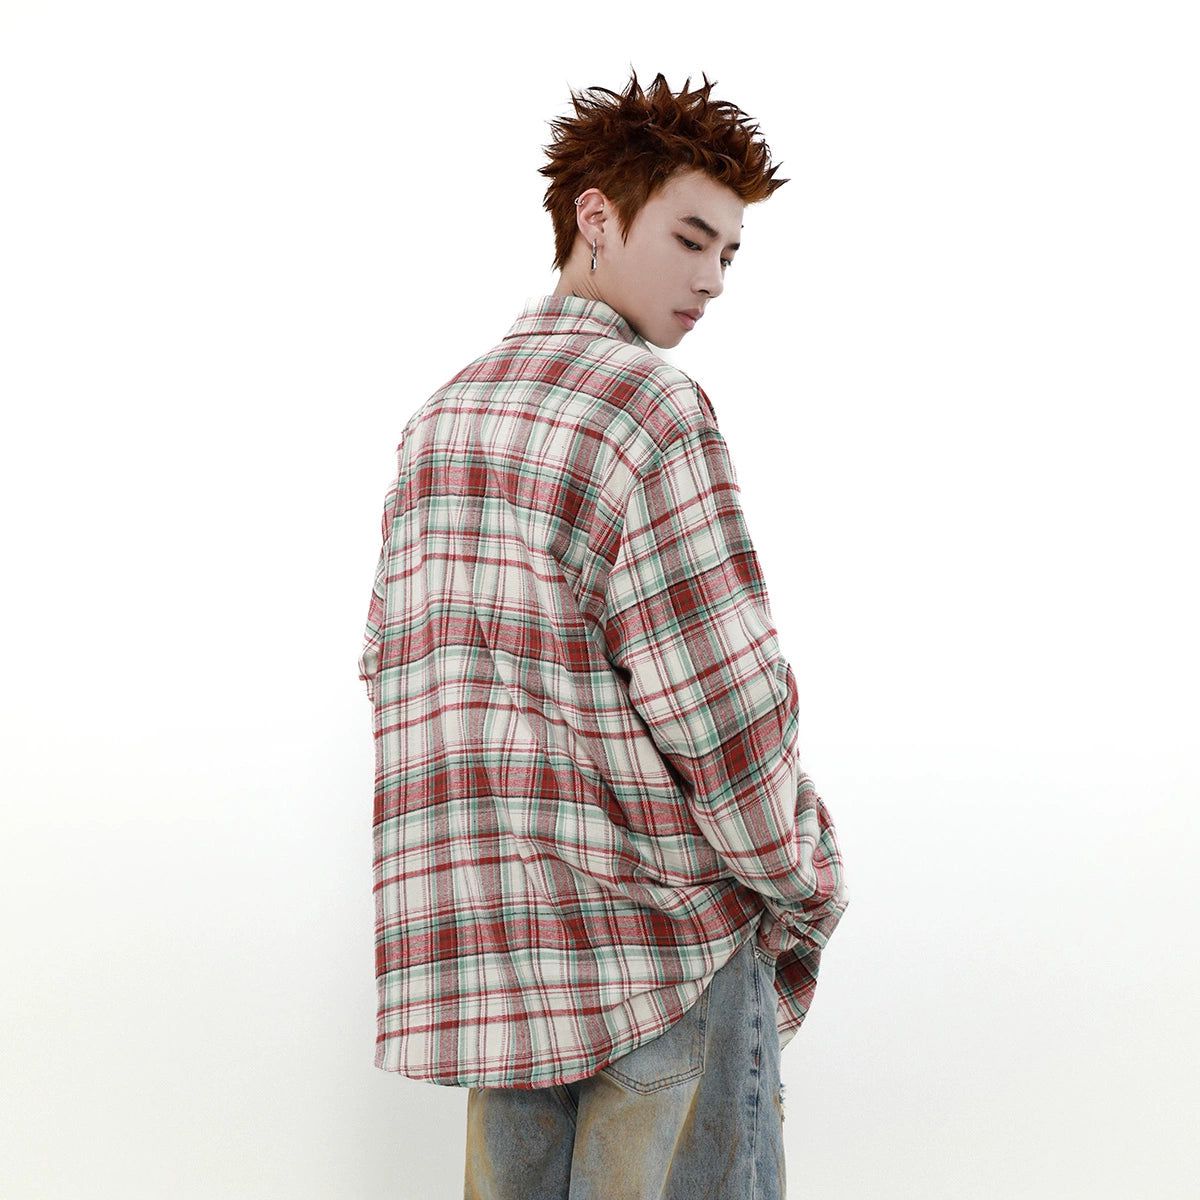 One Pocket Checked Shirt Korean Street Fashion Shirt By Mr Nearly Shop Online at OH Vault